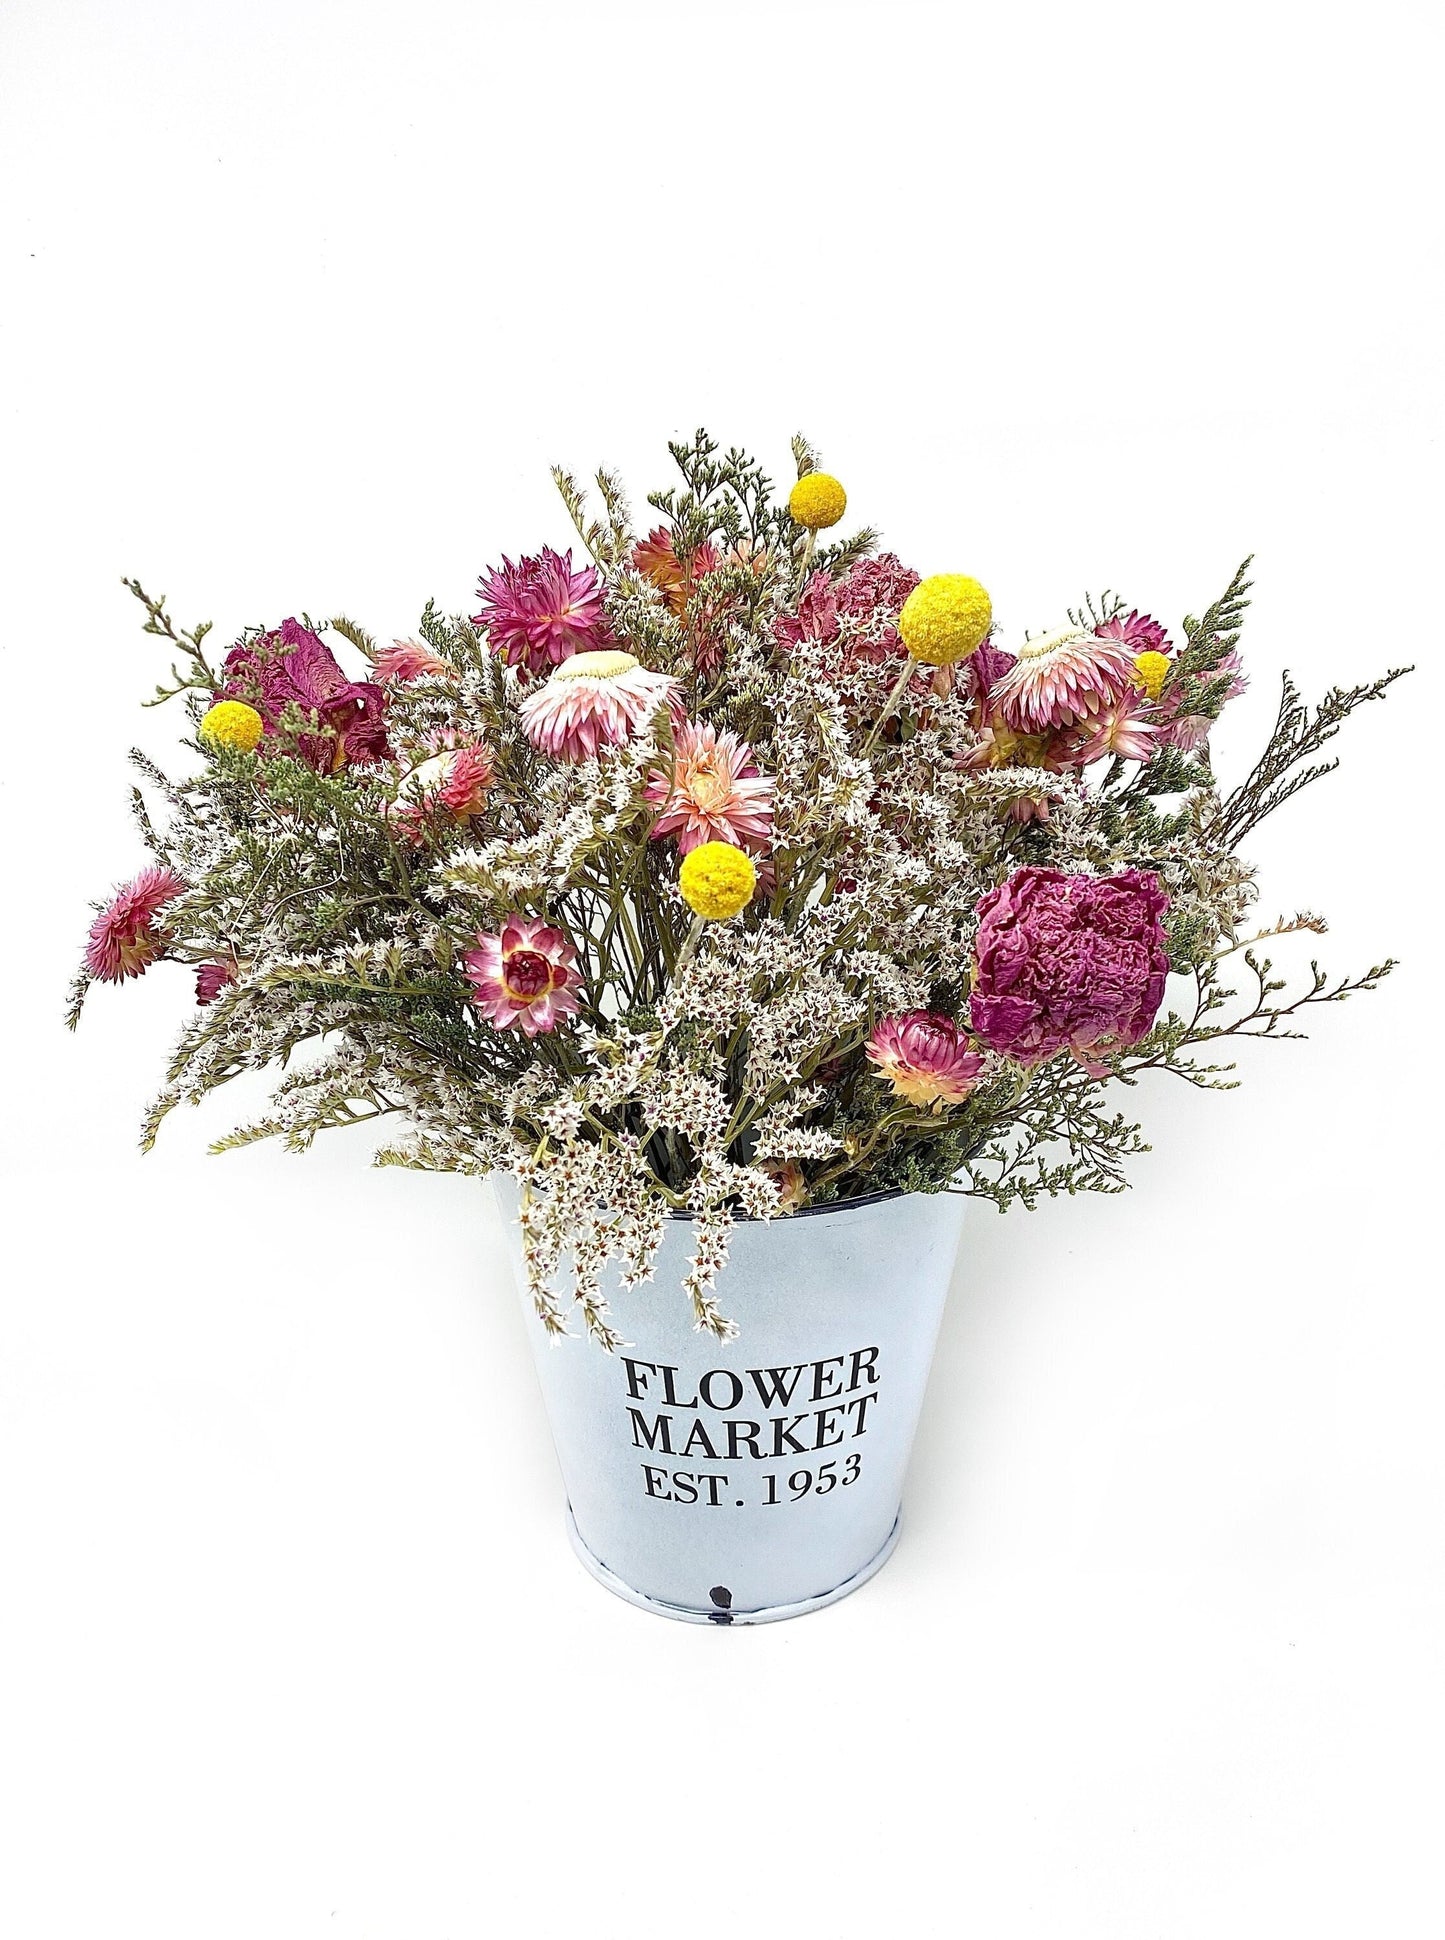 Mothers Day Flower Arrangement, Dried Floral, Spring Bouquet, White Bucket, Pink, Purple, Preserved, Peonies, Natural Flowers, Center Piece